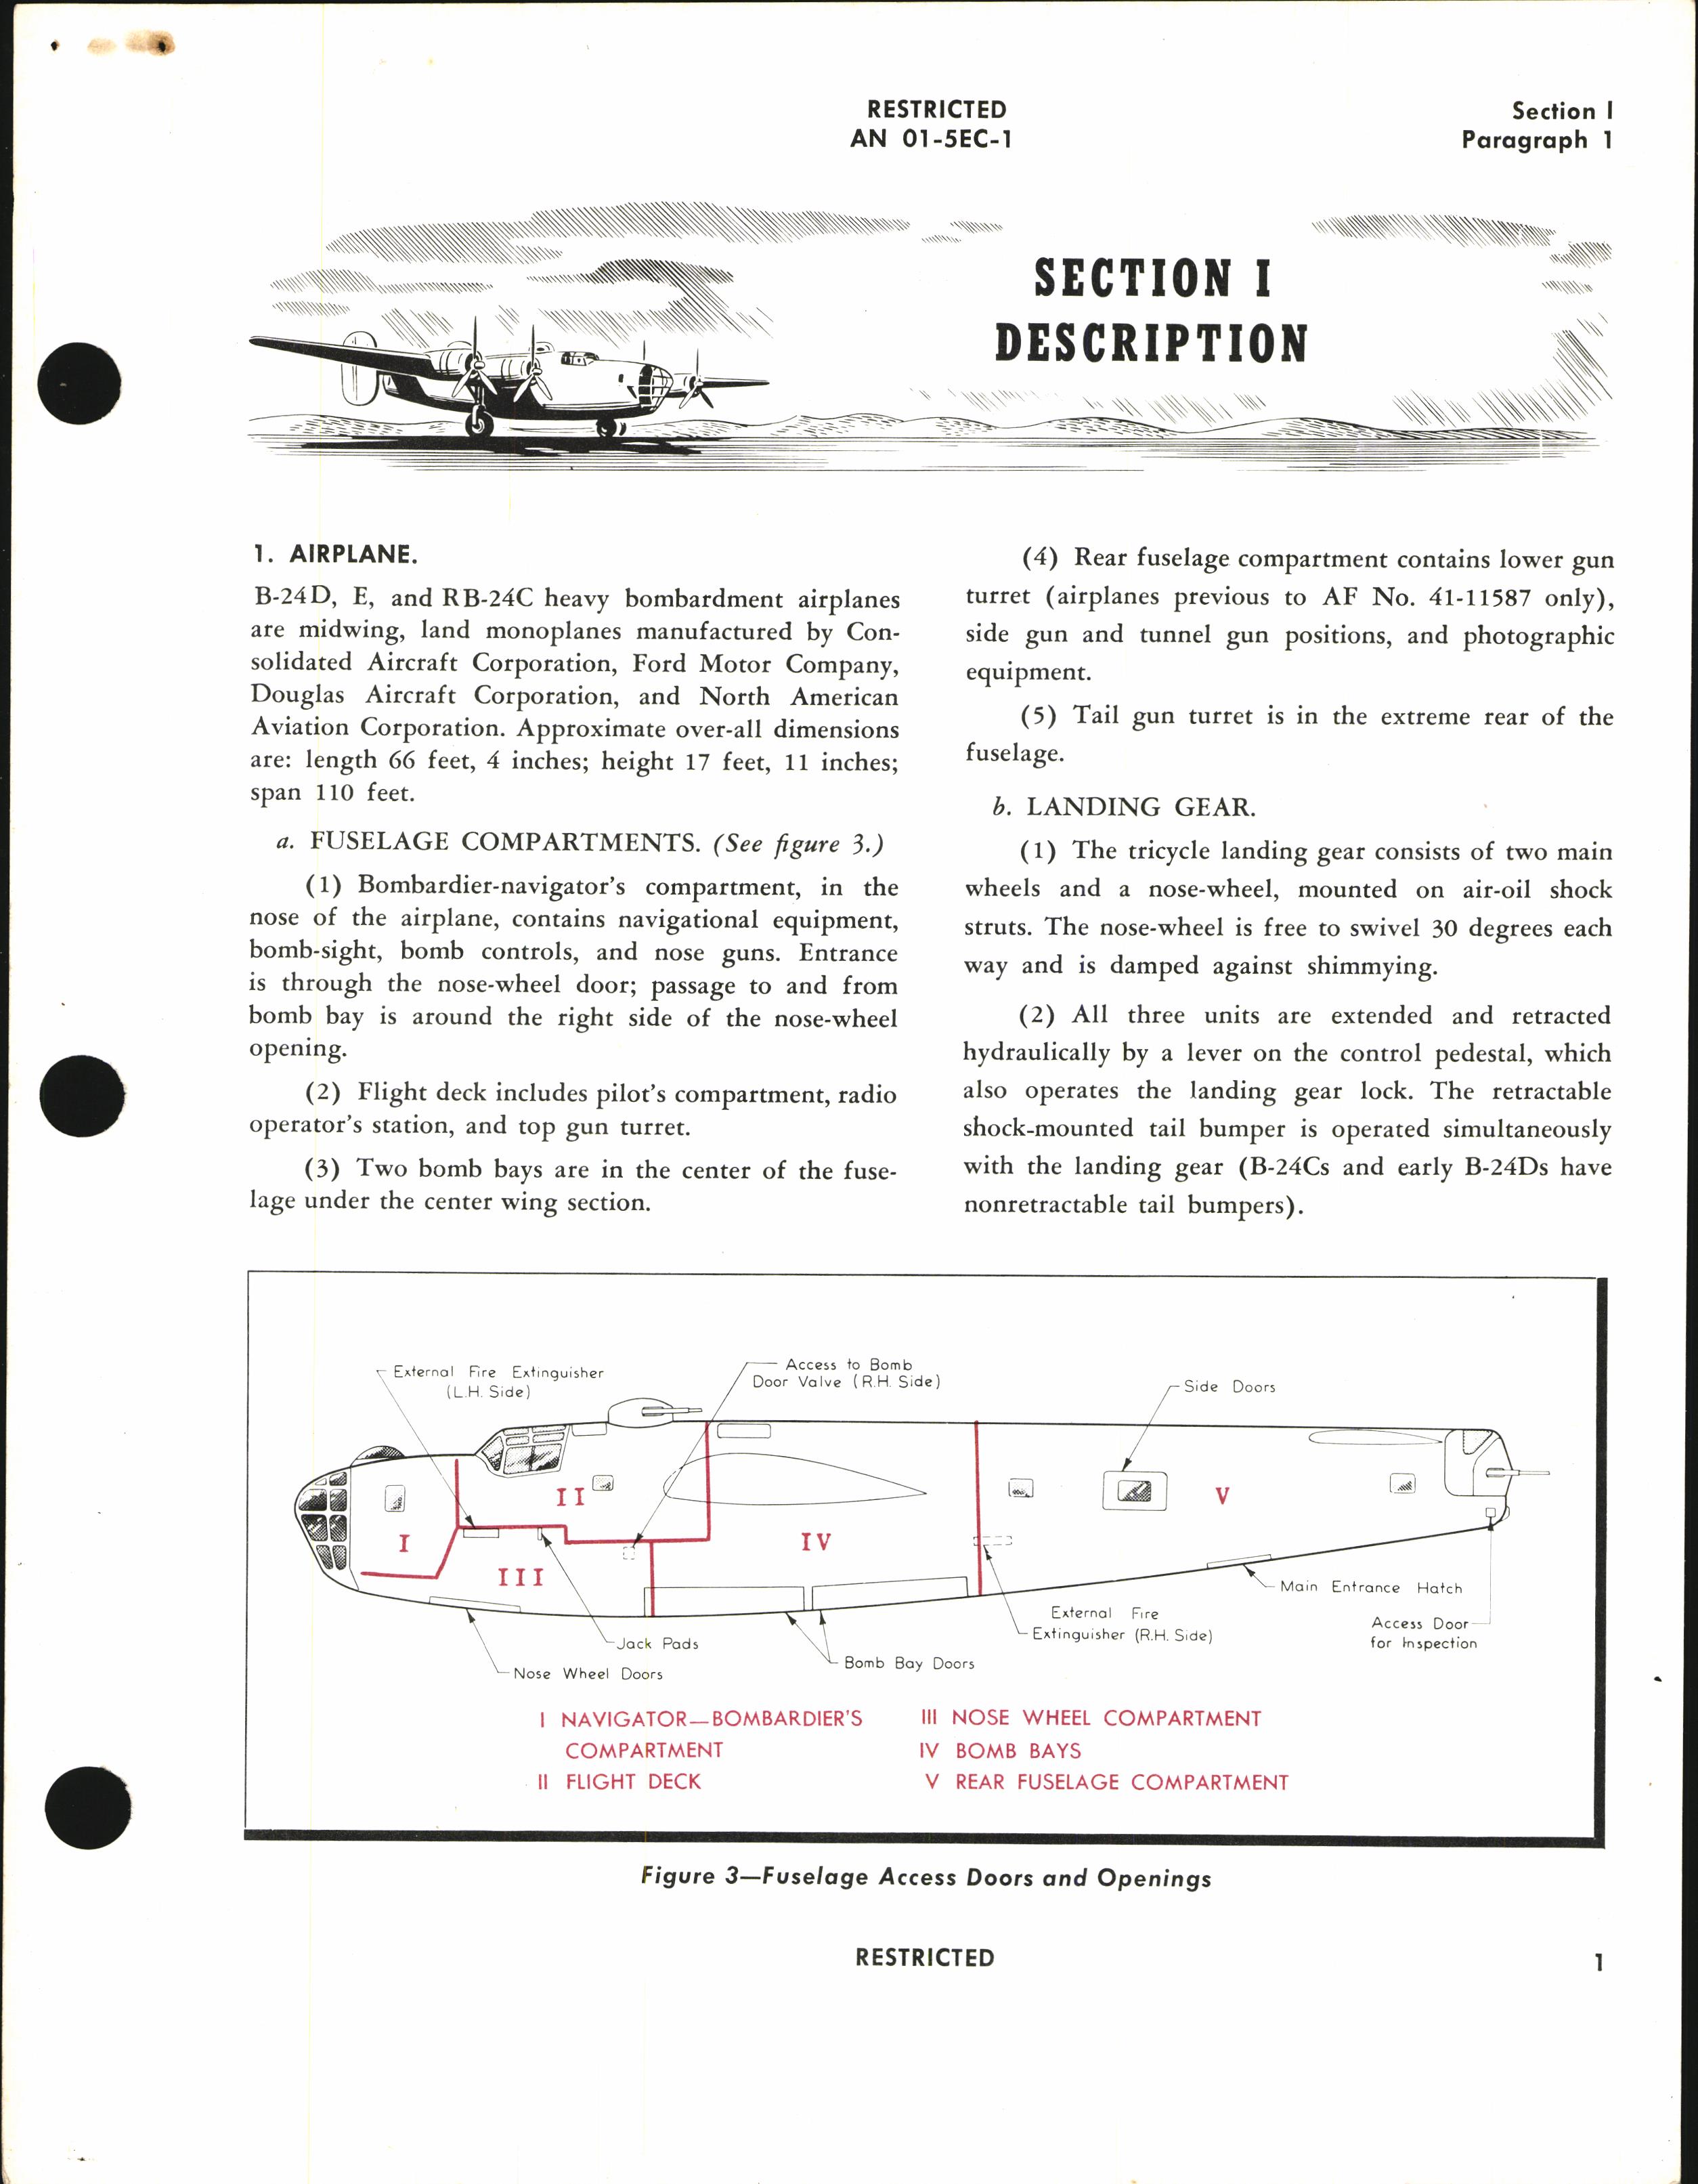 Sample page 5 from AirCorps Library document: Pilot's Flight Operating Instructions for B-24D, E, and RB-24C